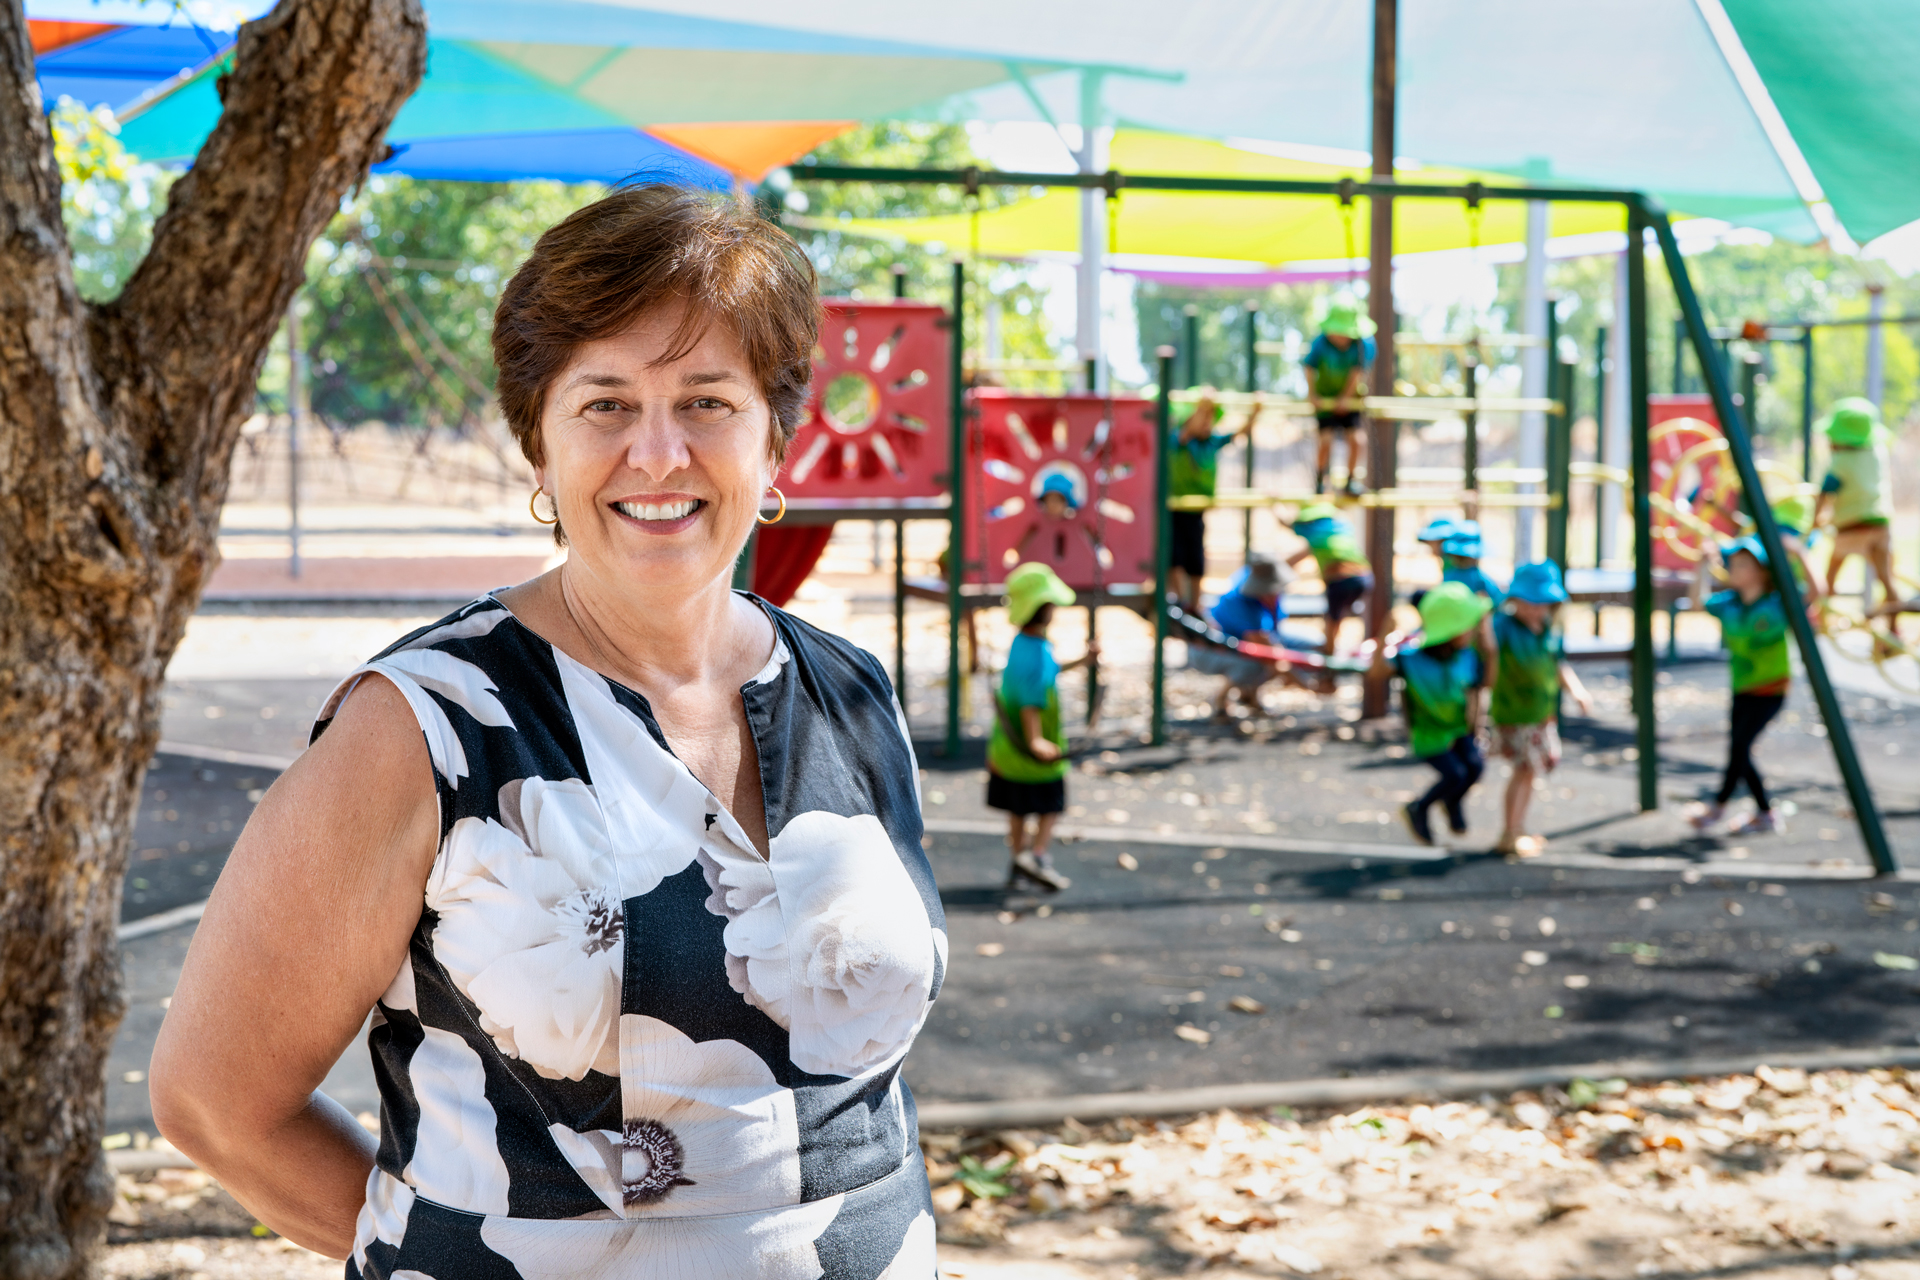 An adult in a playground, smiling at the camera